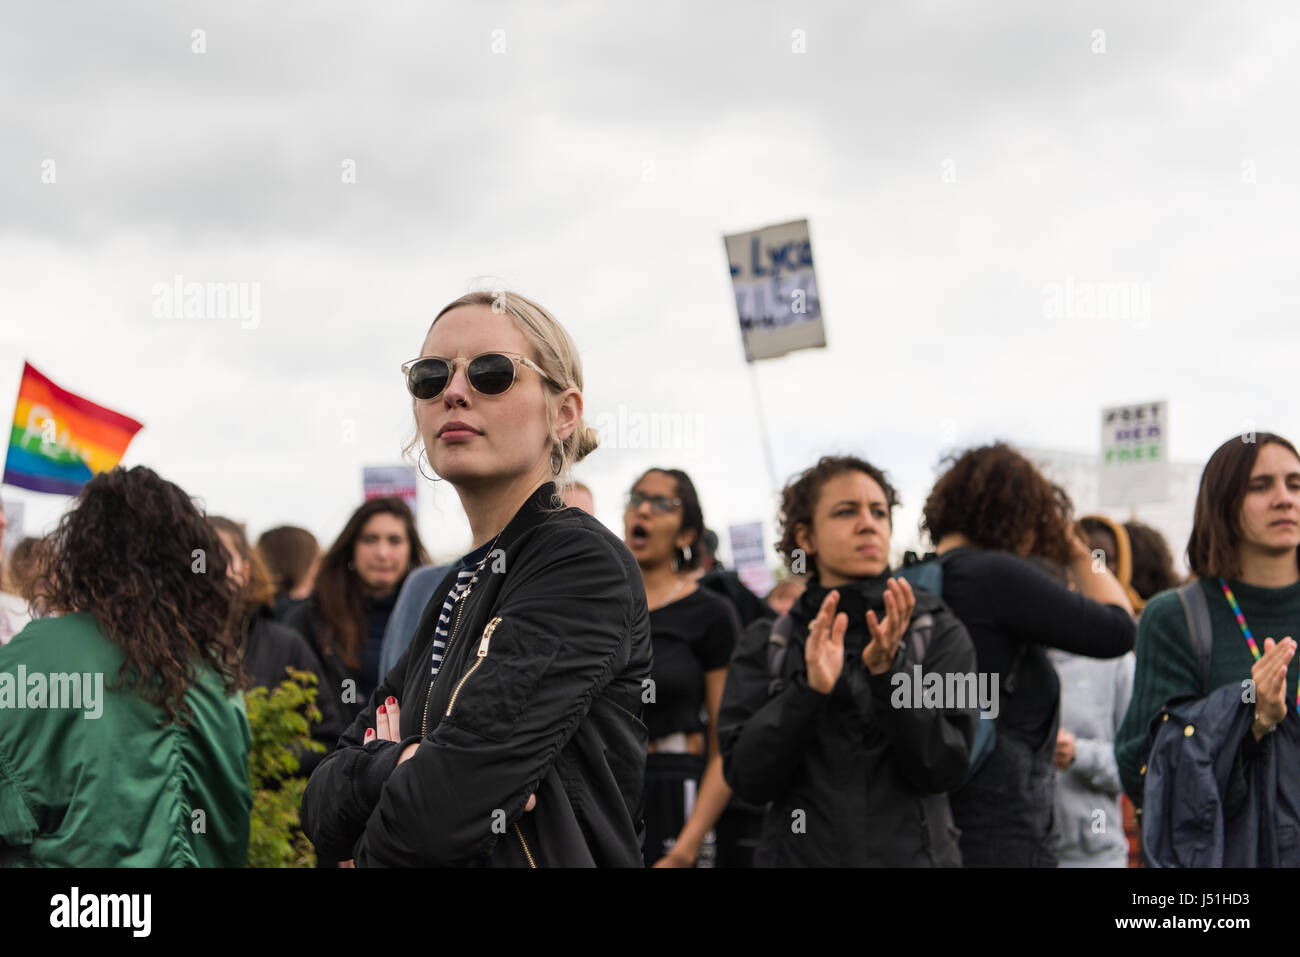 Bedford, UK. 15th May, 2017. A woman at a protest  against UK immigration detention policy, outside Yarl's Wood Immigration Removal Centre. Hundreds of protesters demonstrated outside the Yarl's Wood centre, kicking and hitting the perimeter fence, and calling for the centre to be shutdown. Credit: Jacob Sacks-Jones/Alamy Live News. Stock Photo